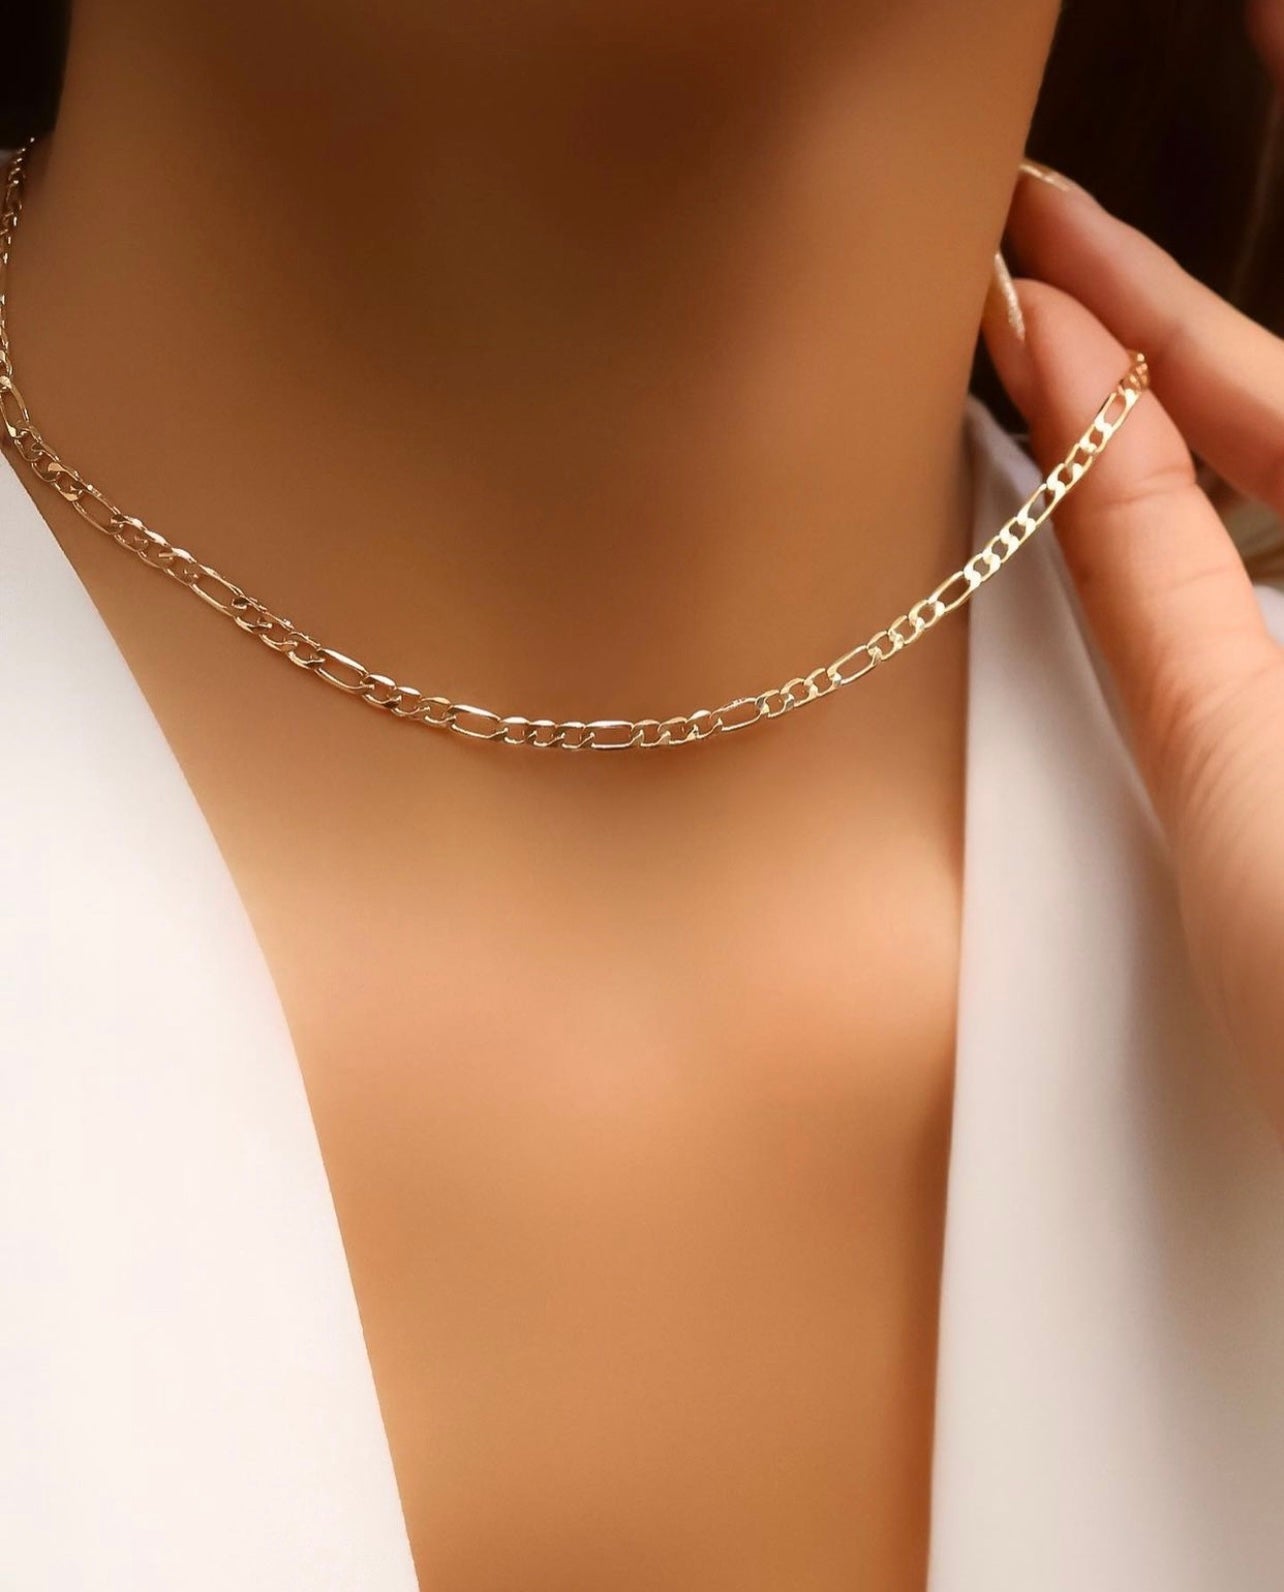 Italian Necklace Chain 18" inches | CODE: DIY3